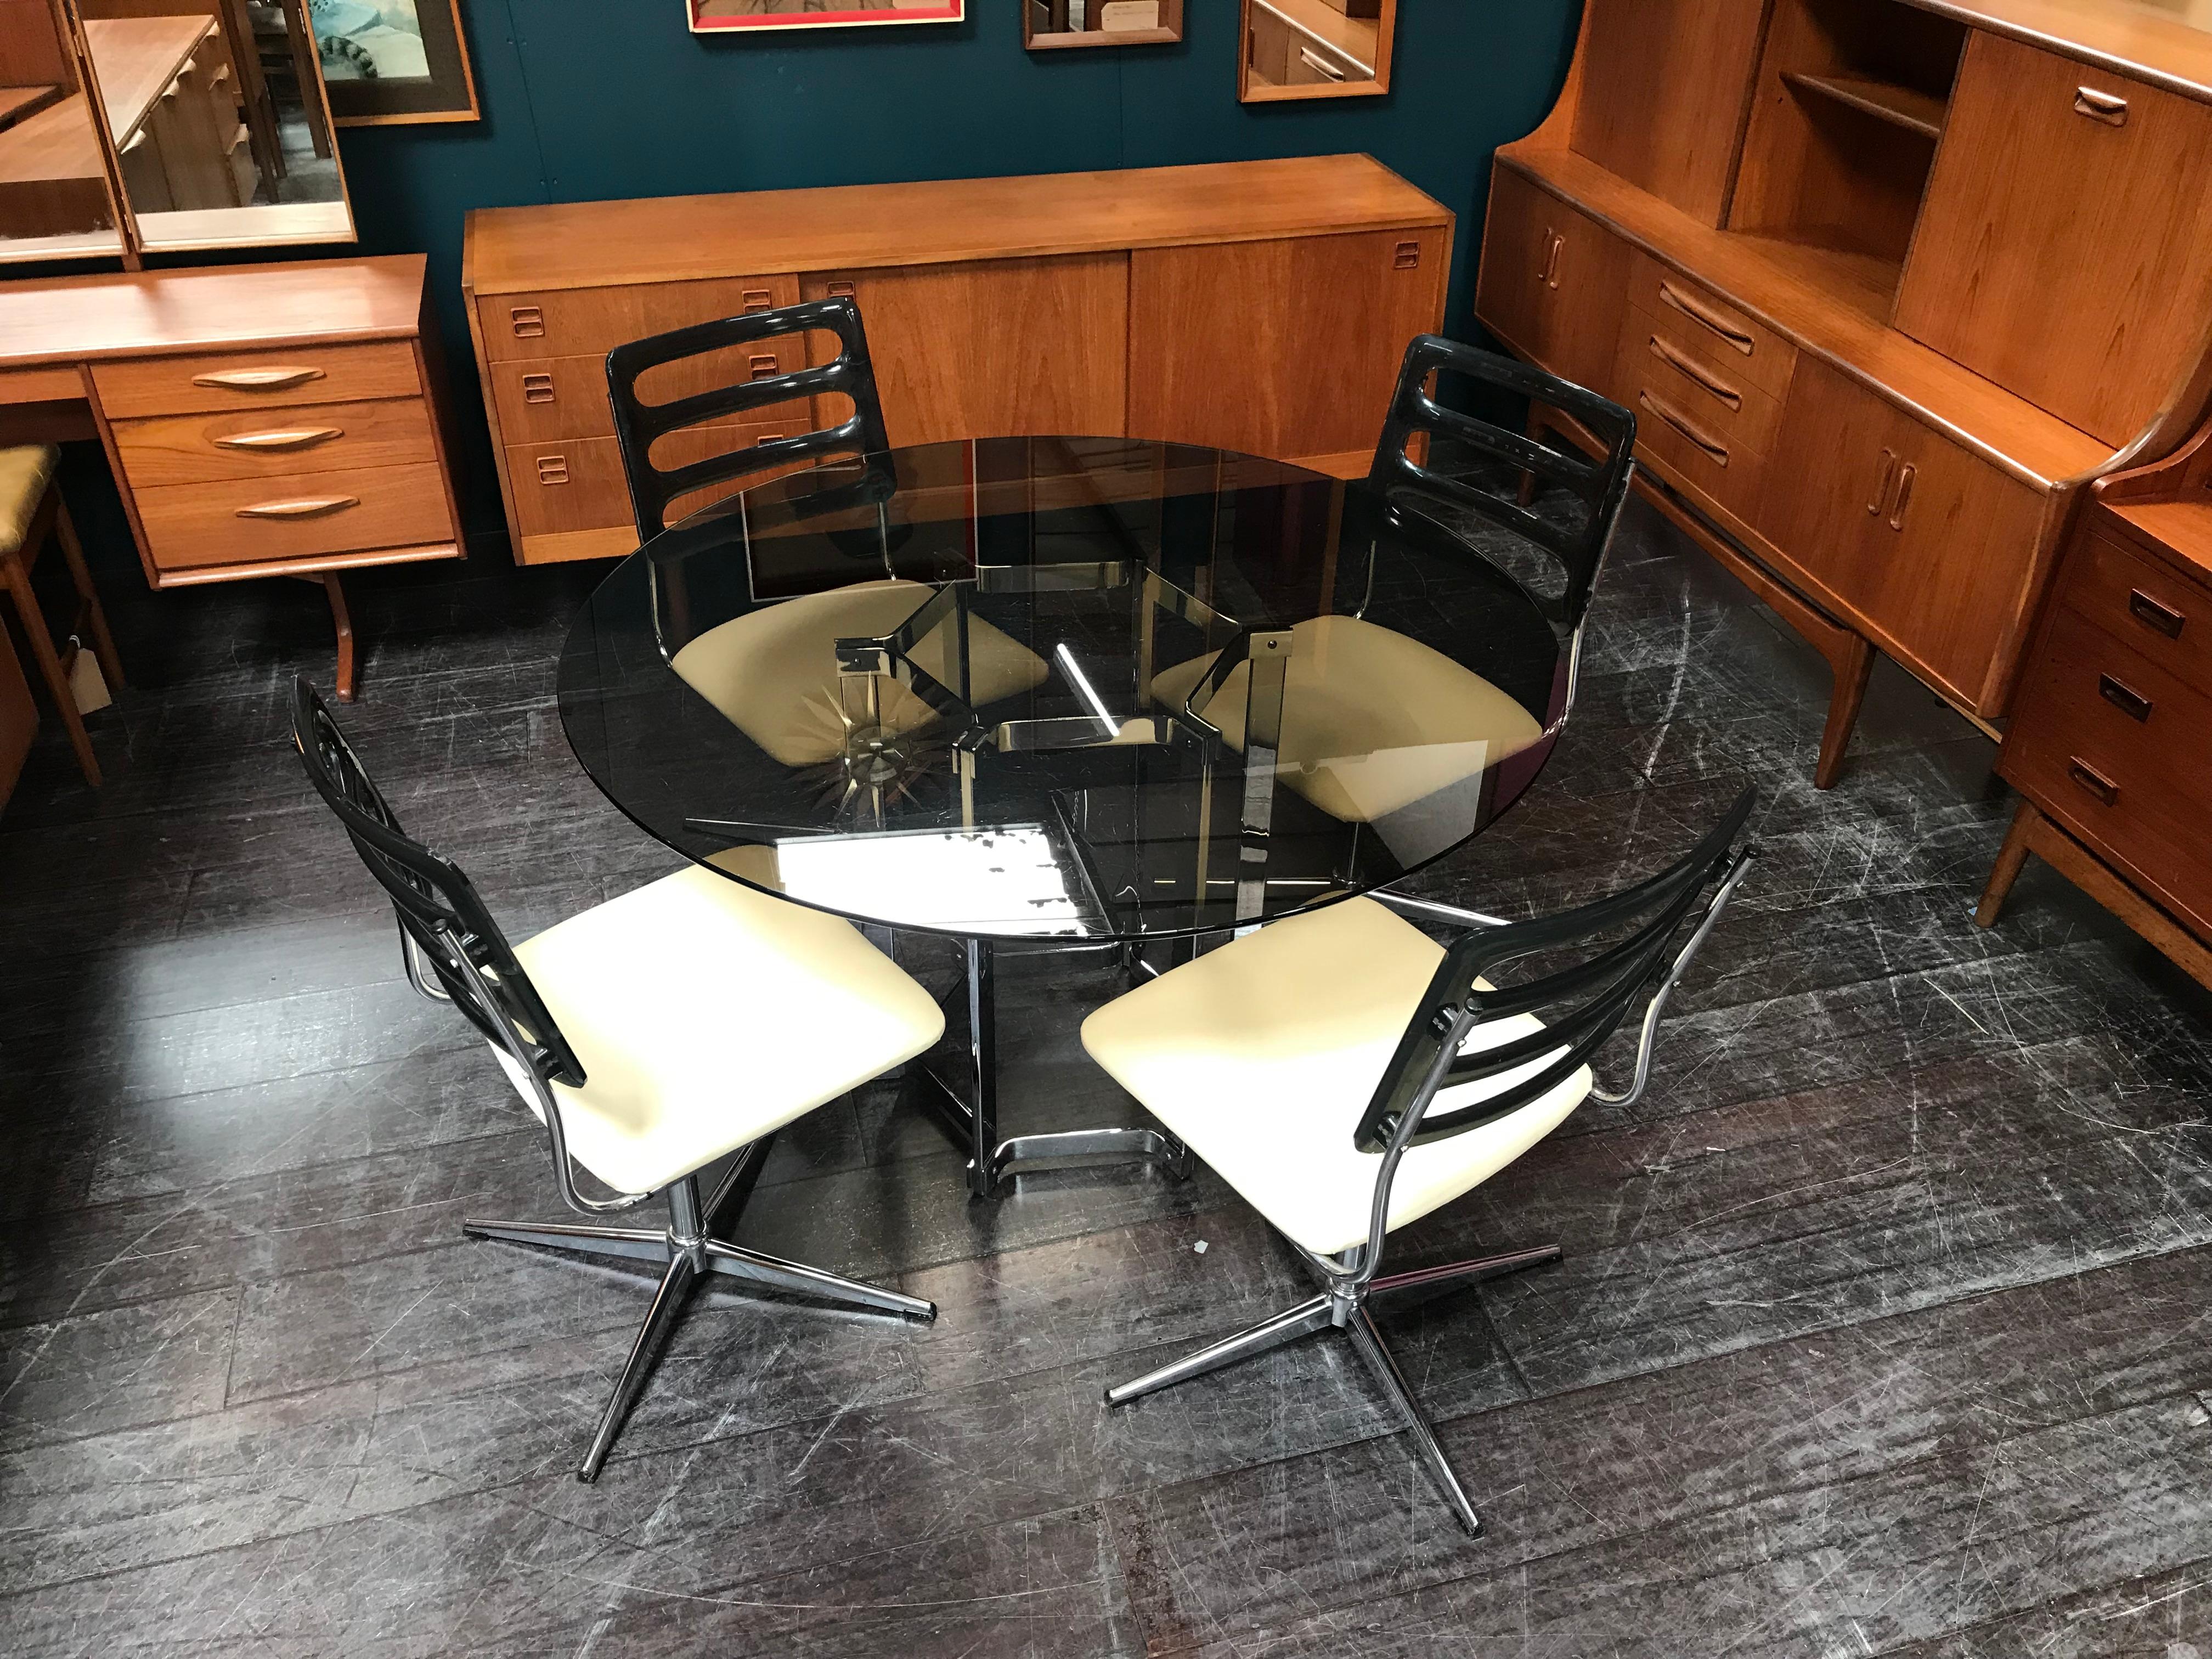 English Mid Century Chrome & Glass Table by Richard Young for Merrow with 4 Chairs For Sale